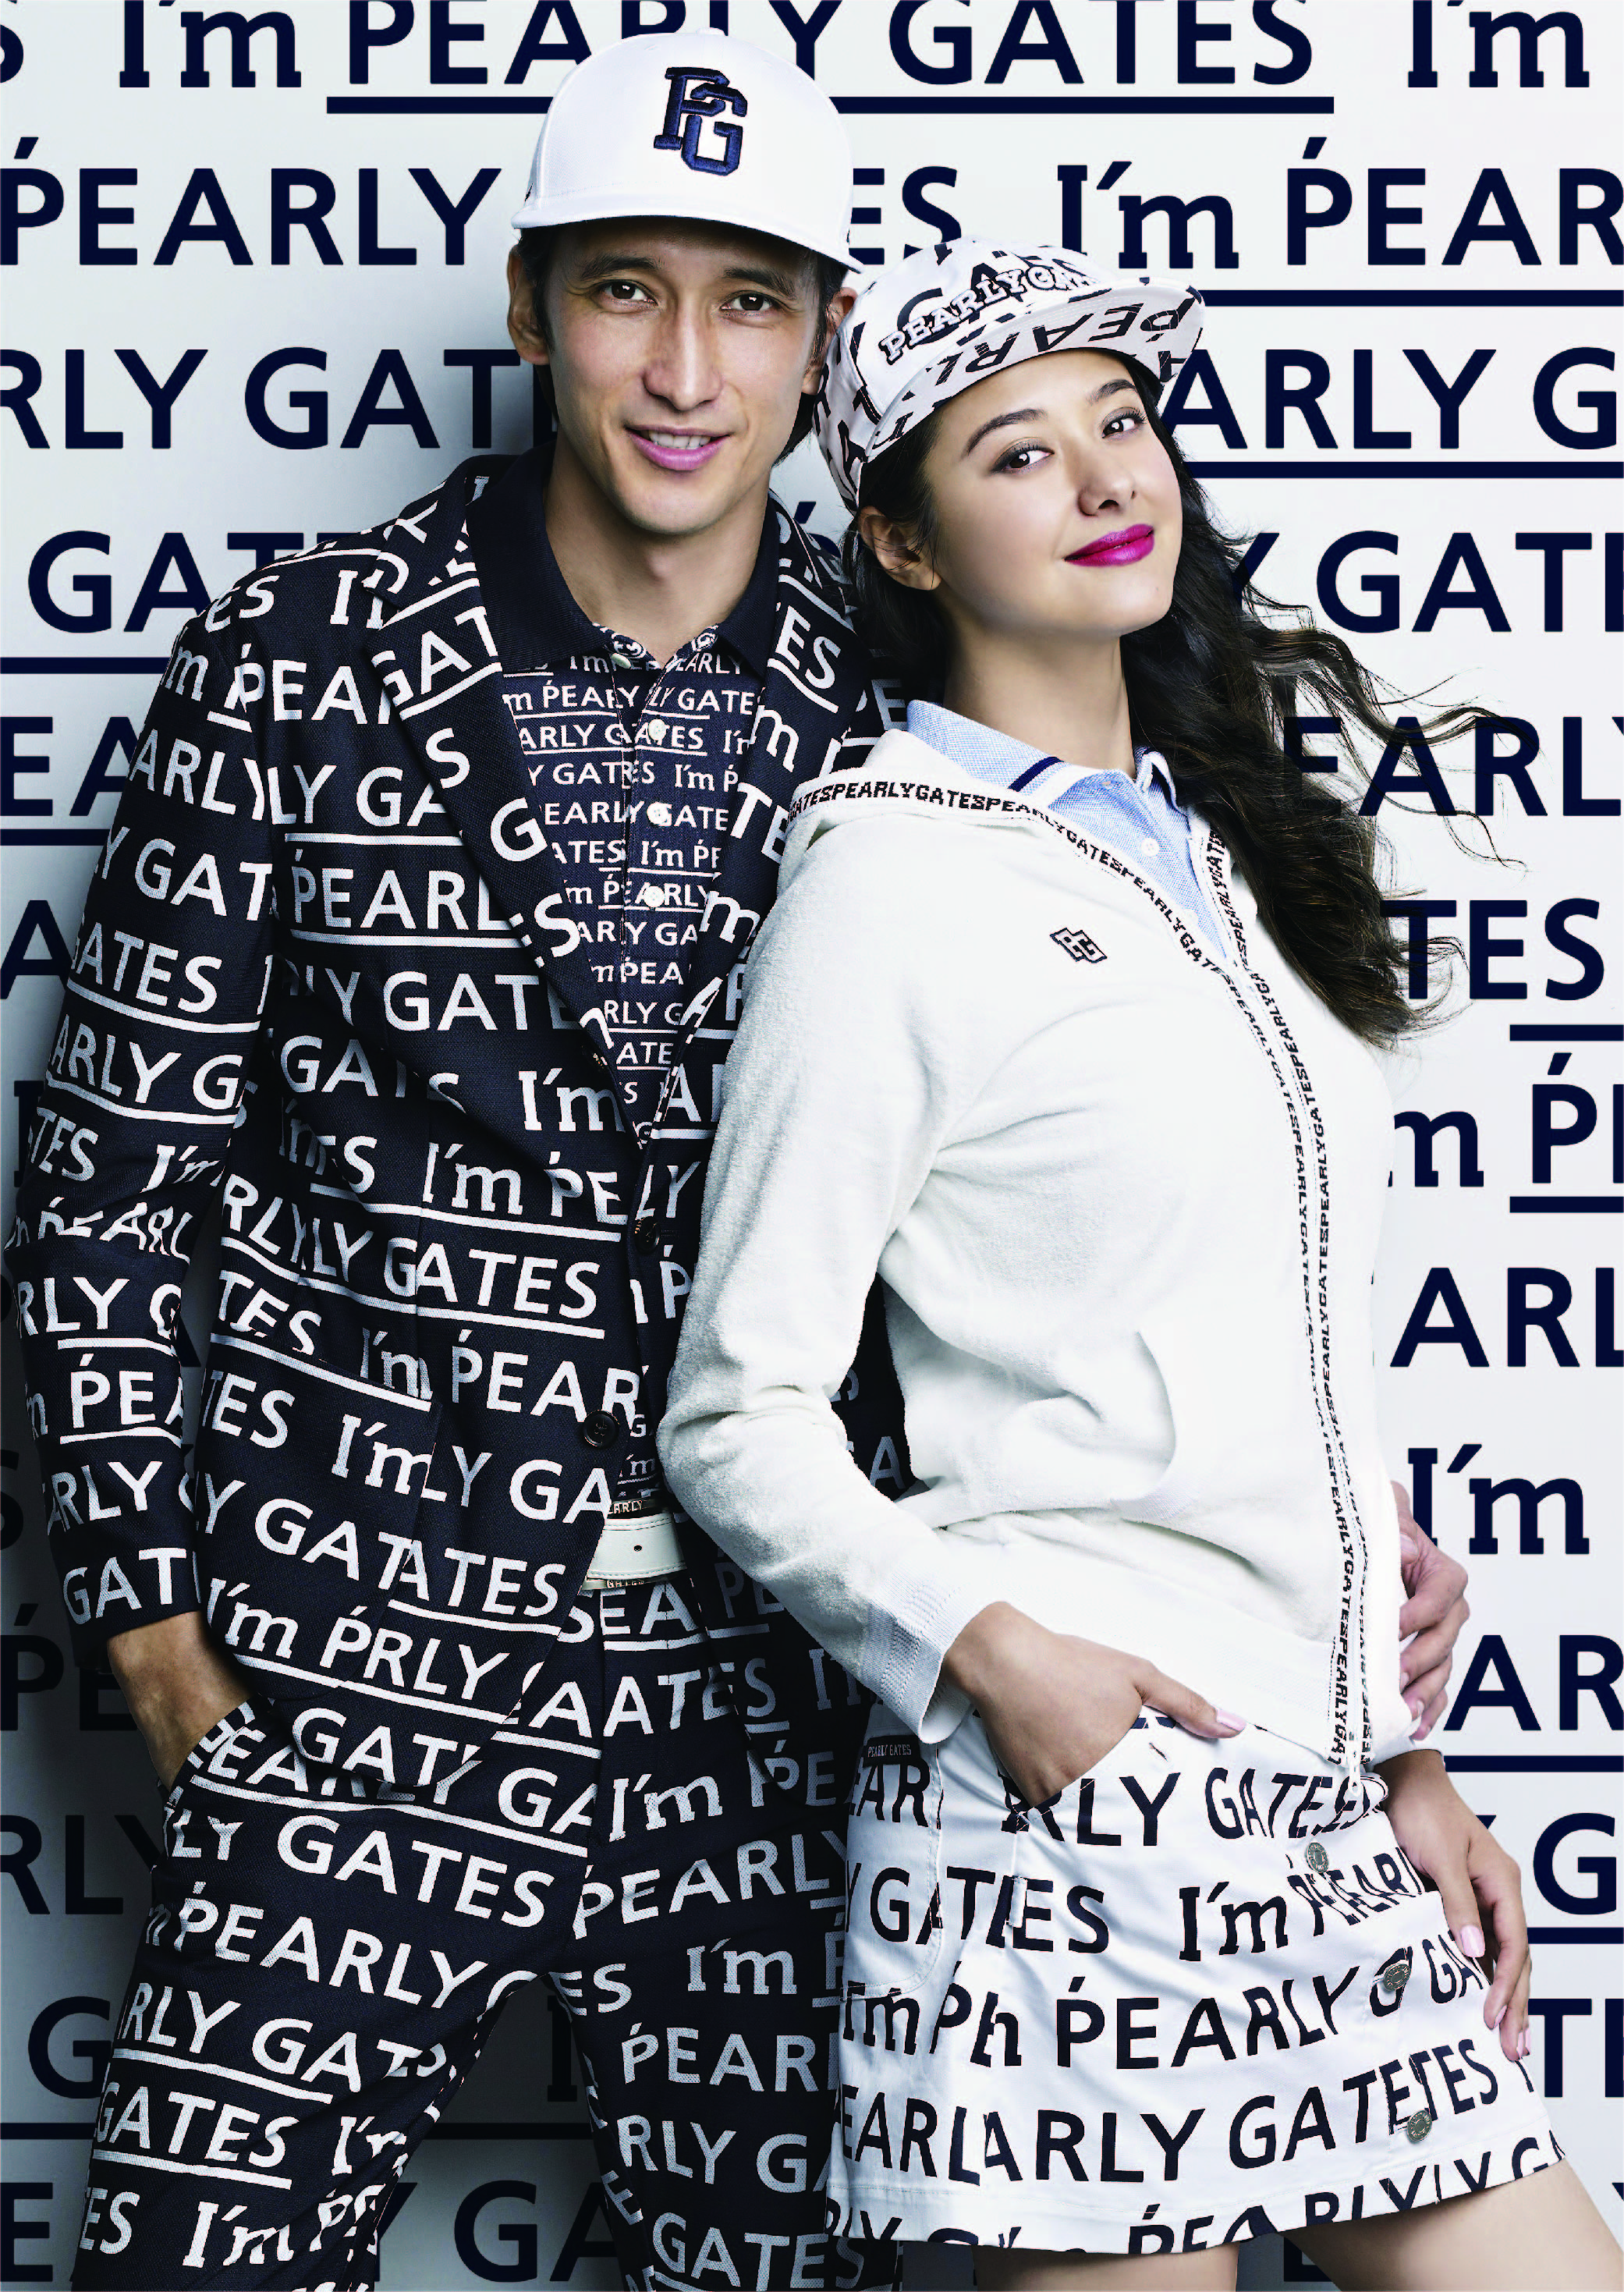 TSI BRAND INTERVIEW 「PEARLY GATES」 ｜トピックス｜ | TSI HOLDINGS